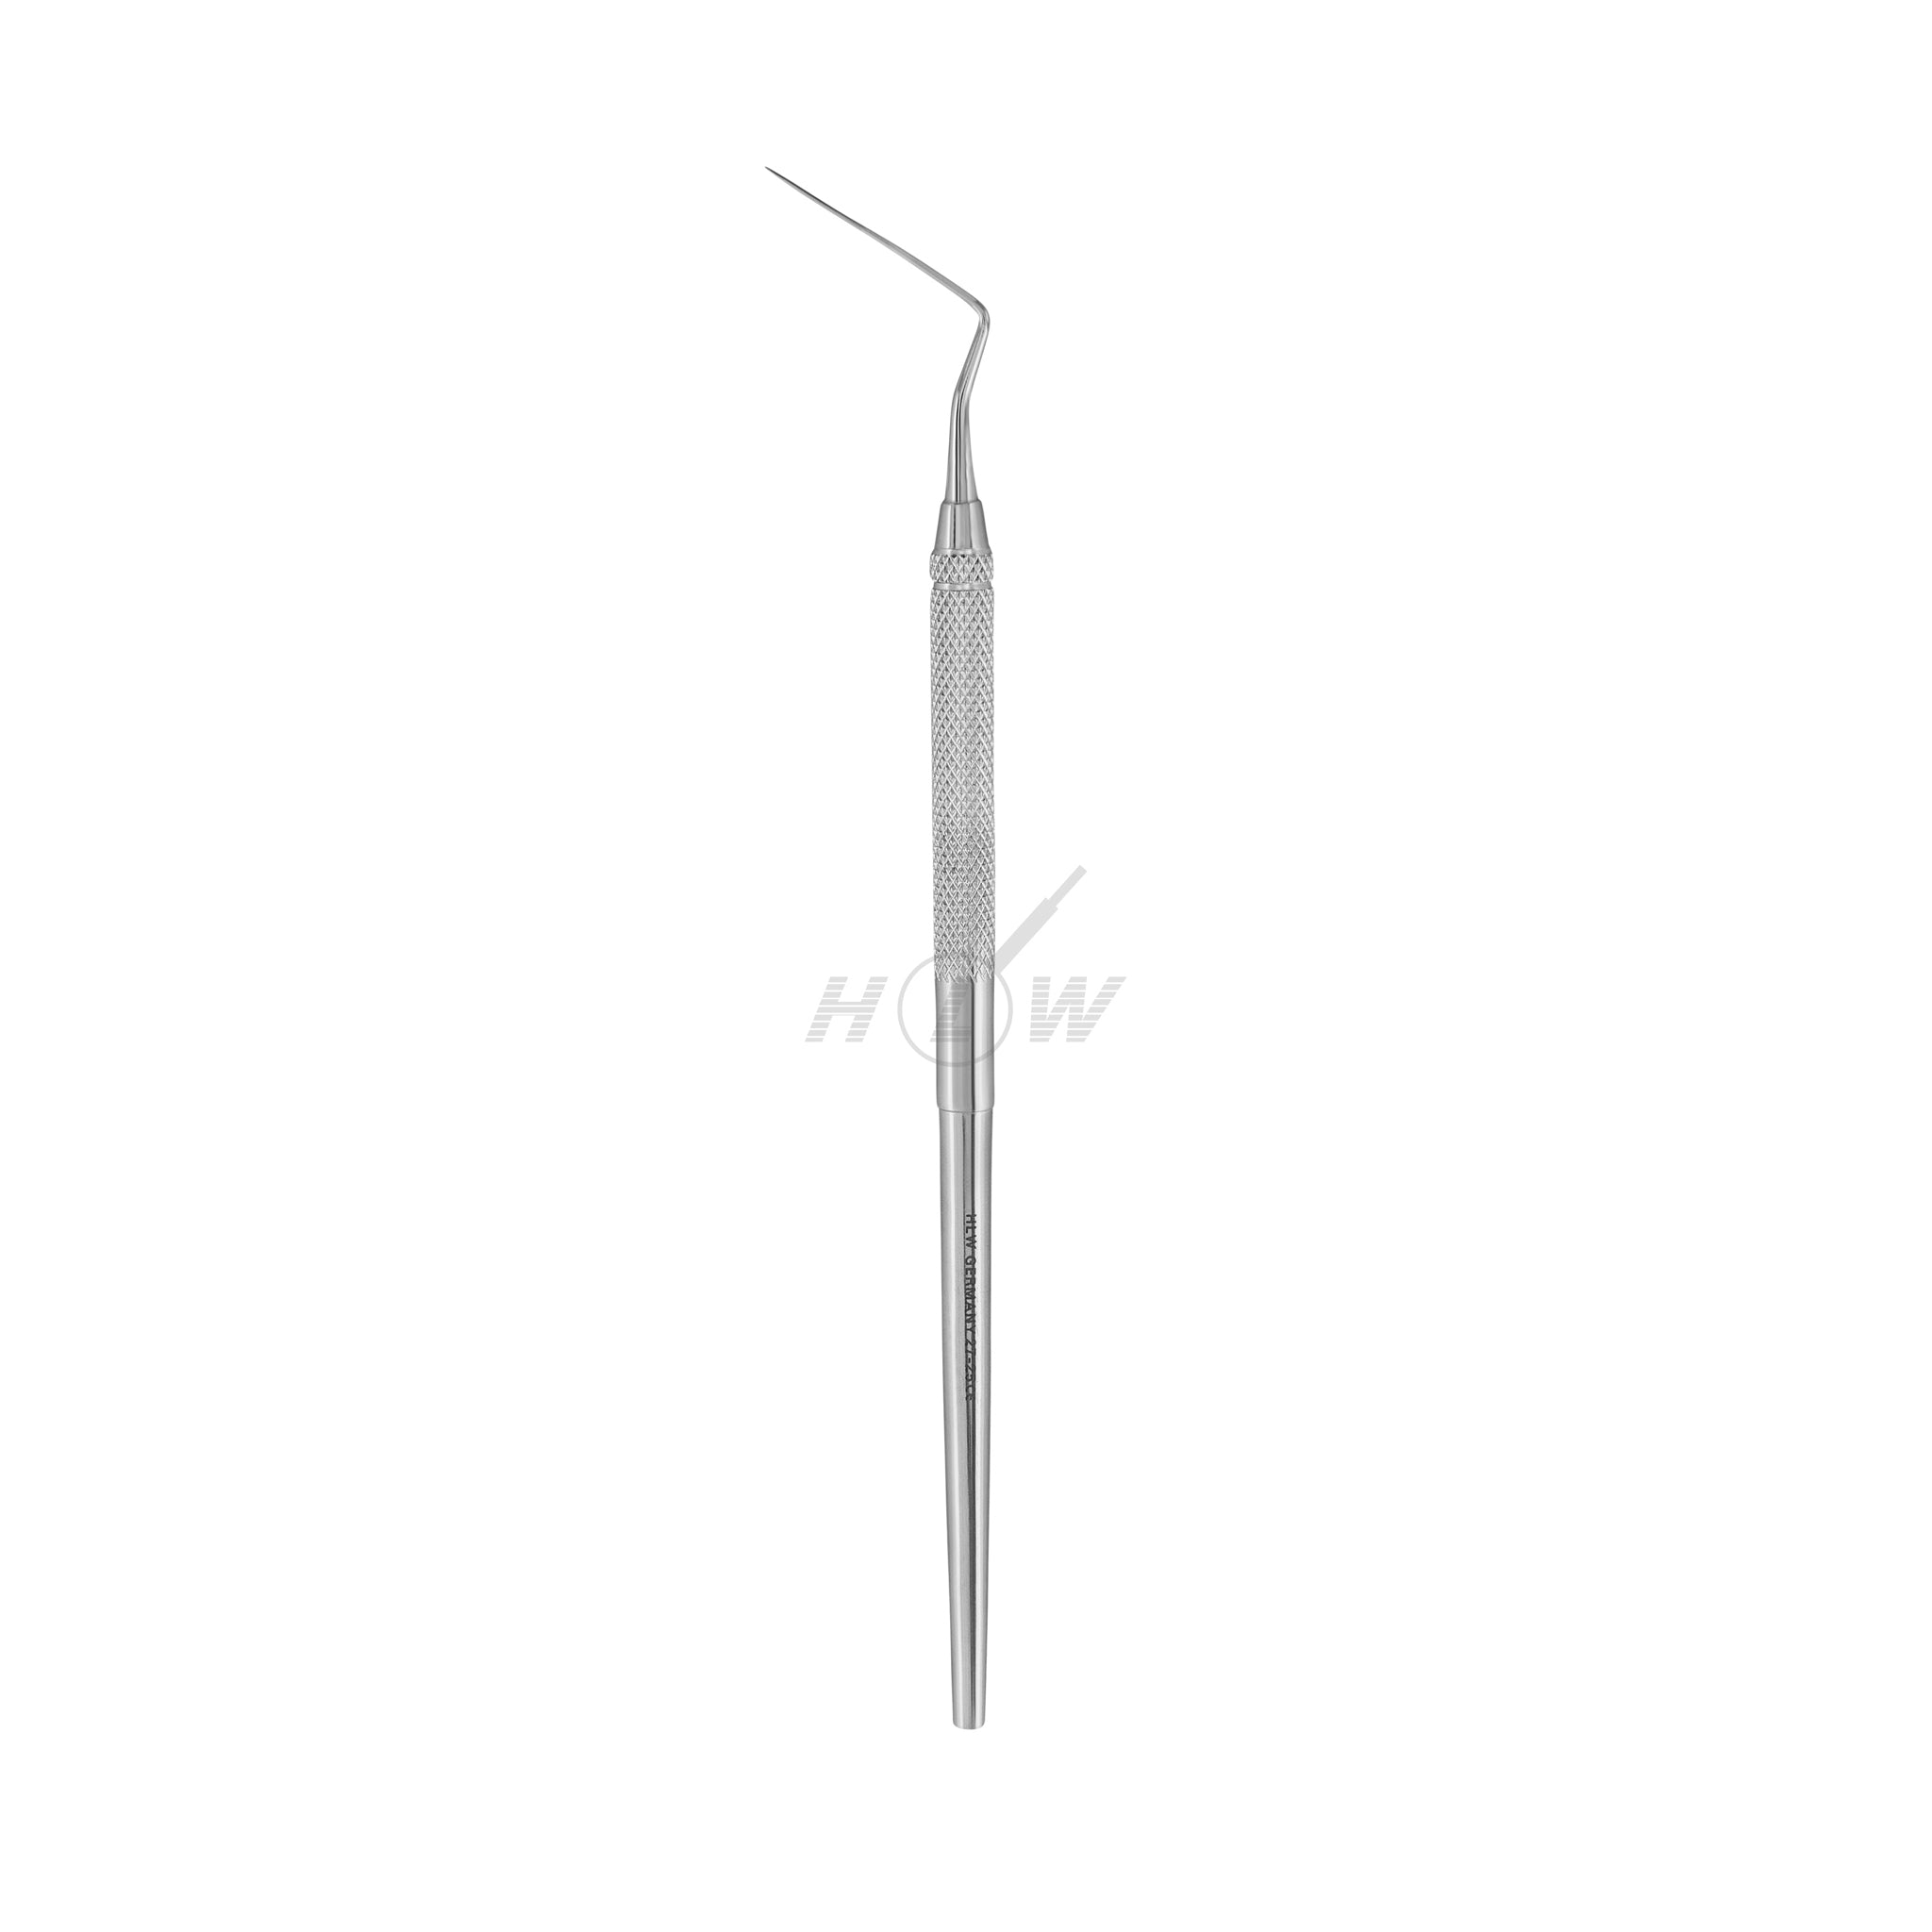 Spreader root canal expander